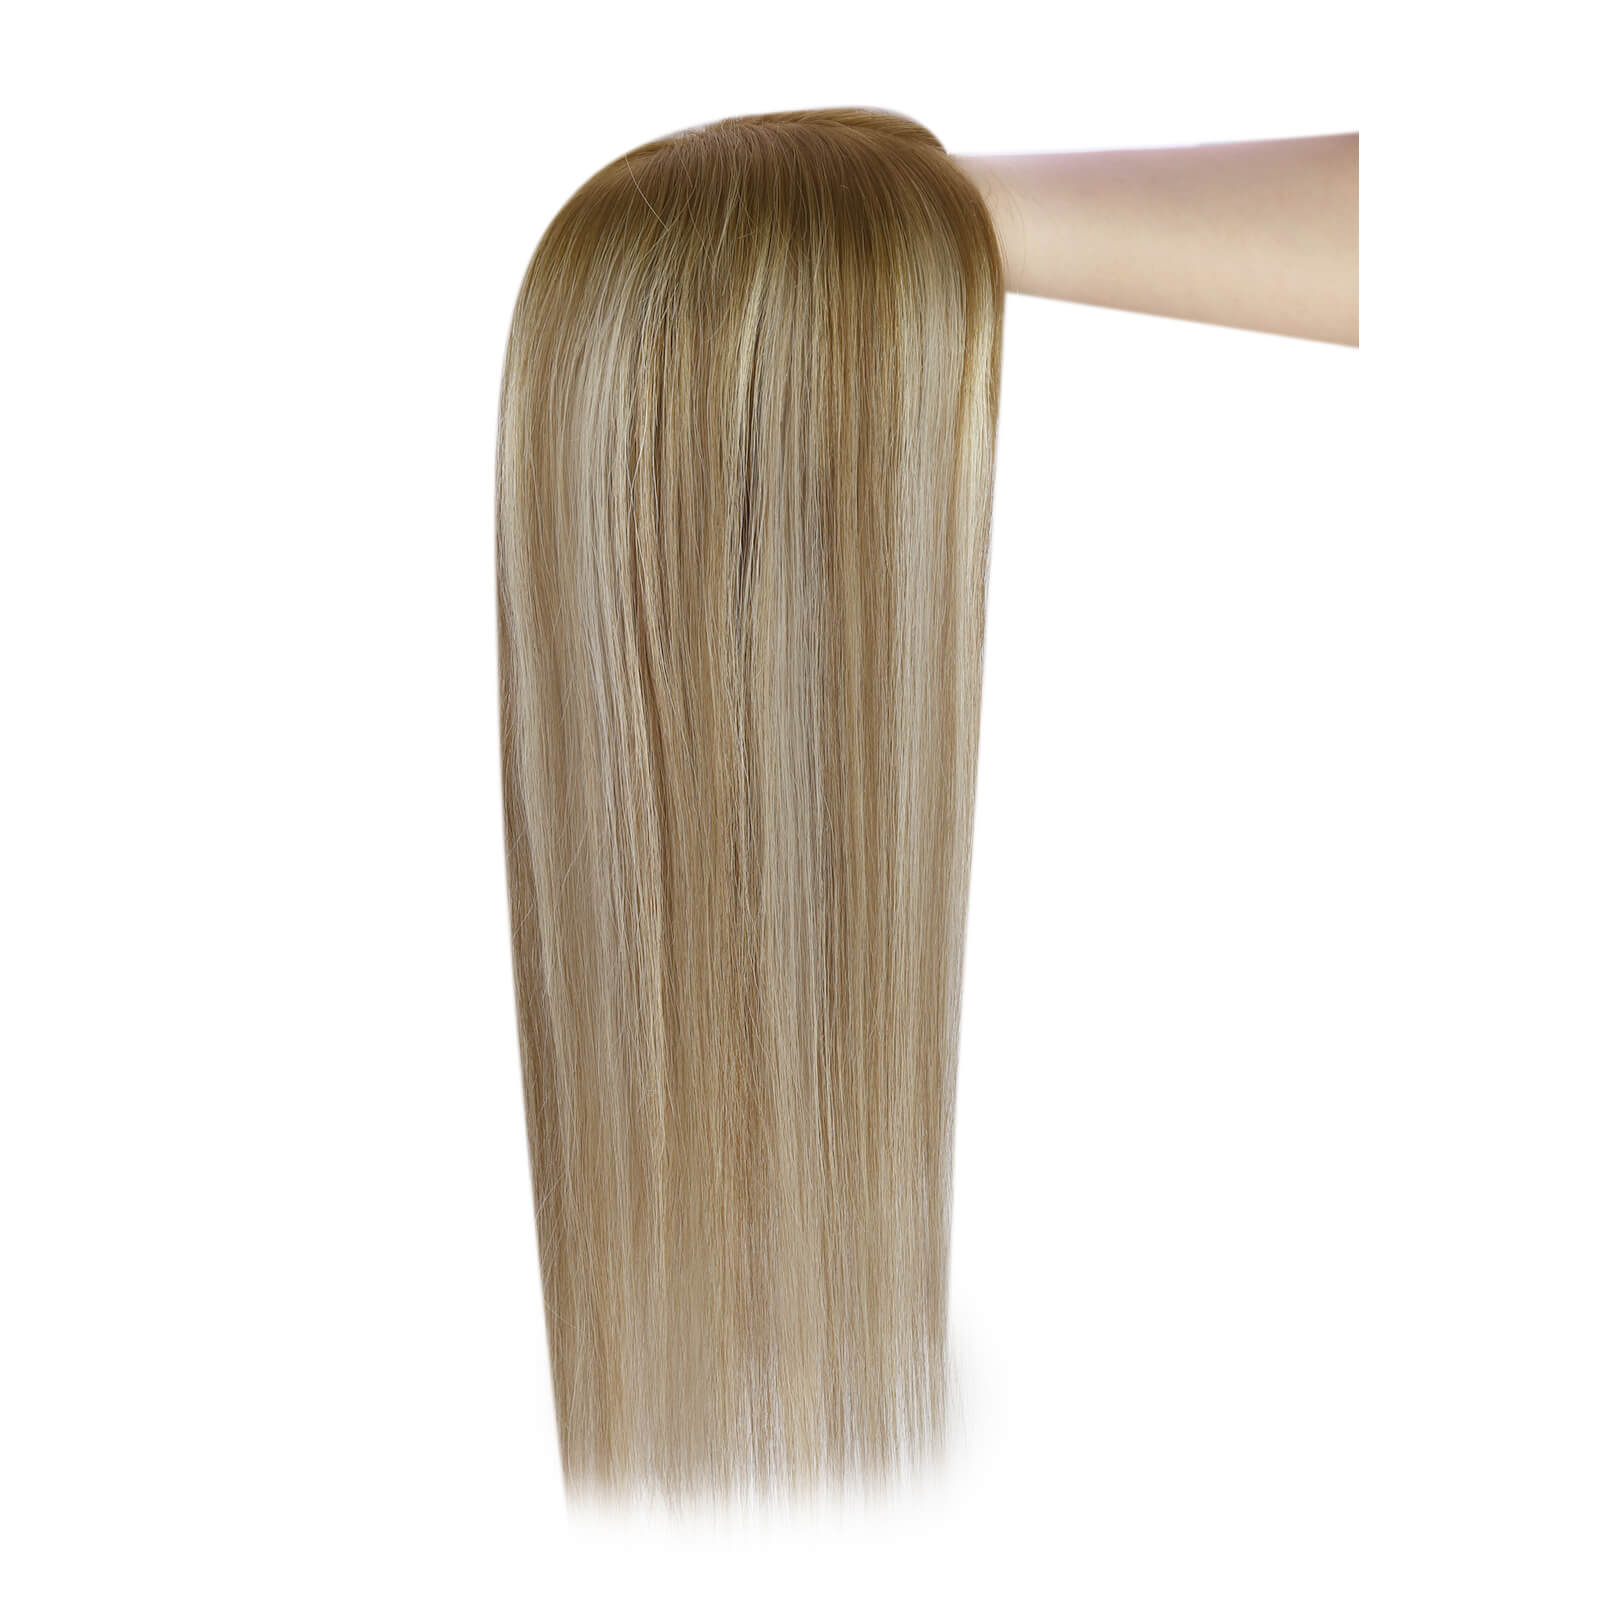 Best Hair Topper Hair Pieces Virgin Real Human Hair 6*7 inch Brown and Blonde 8C/60